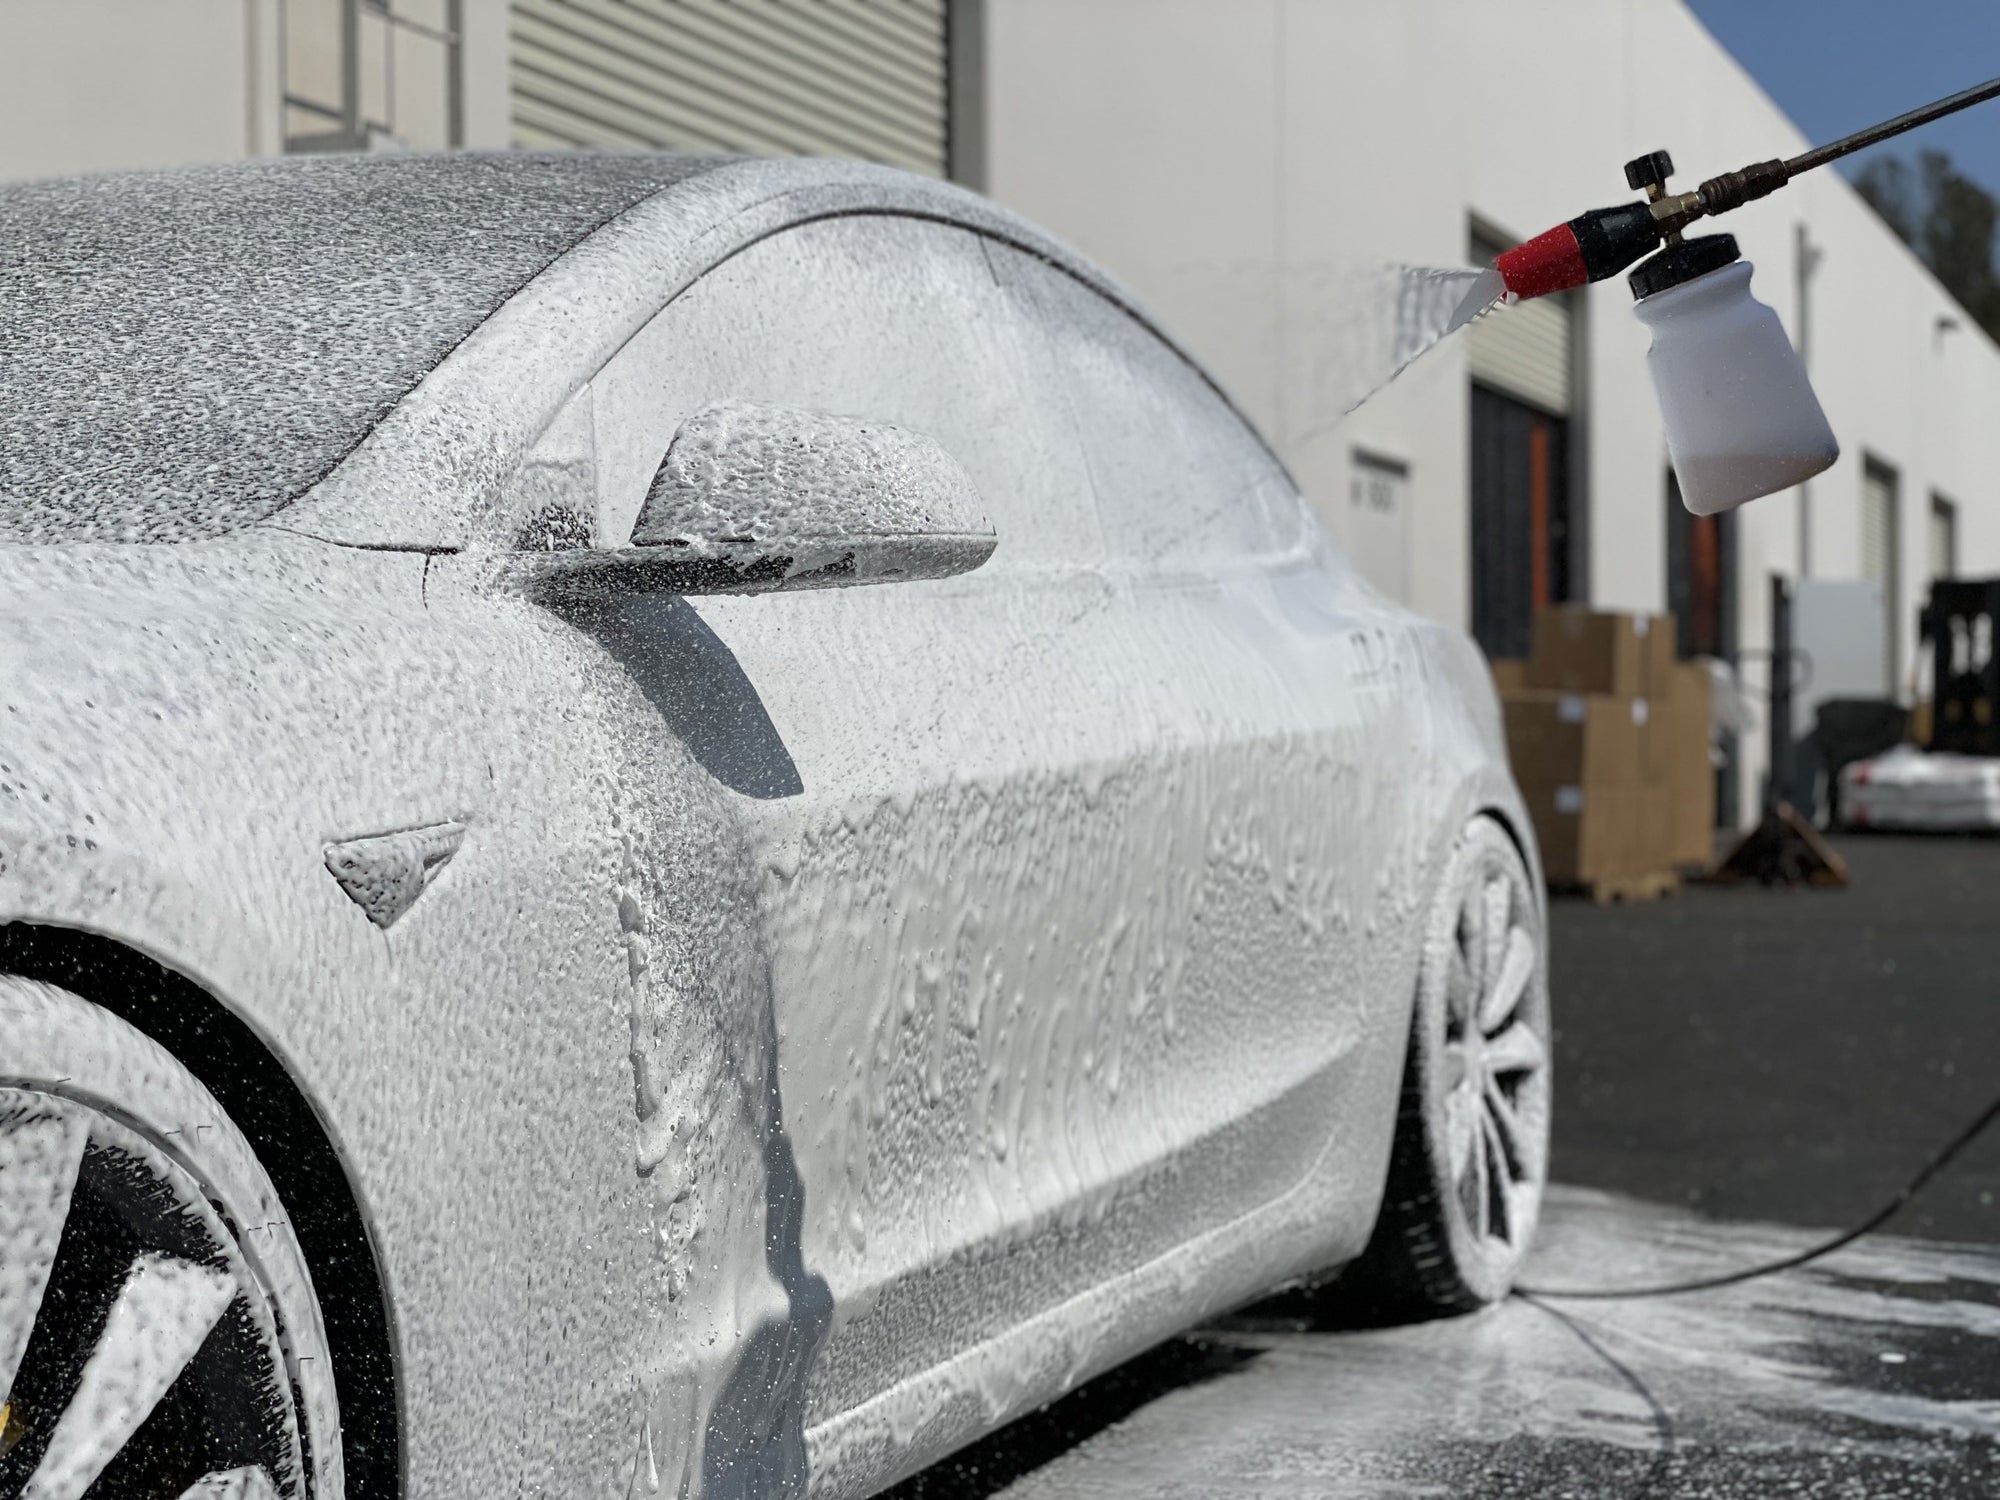 Tesla Cleaning Guide: Tips for Washing and Maintaining Your Electric Car